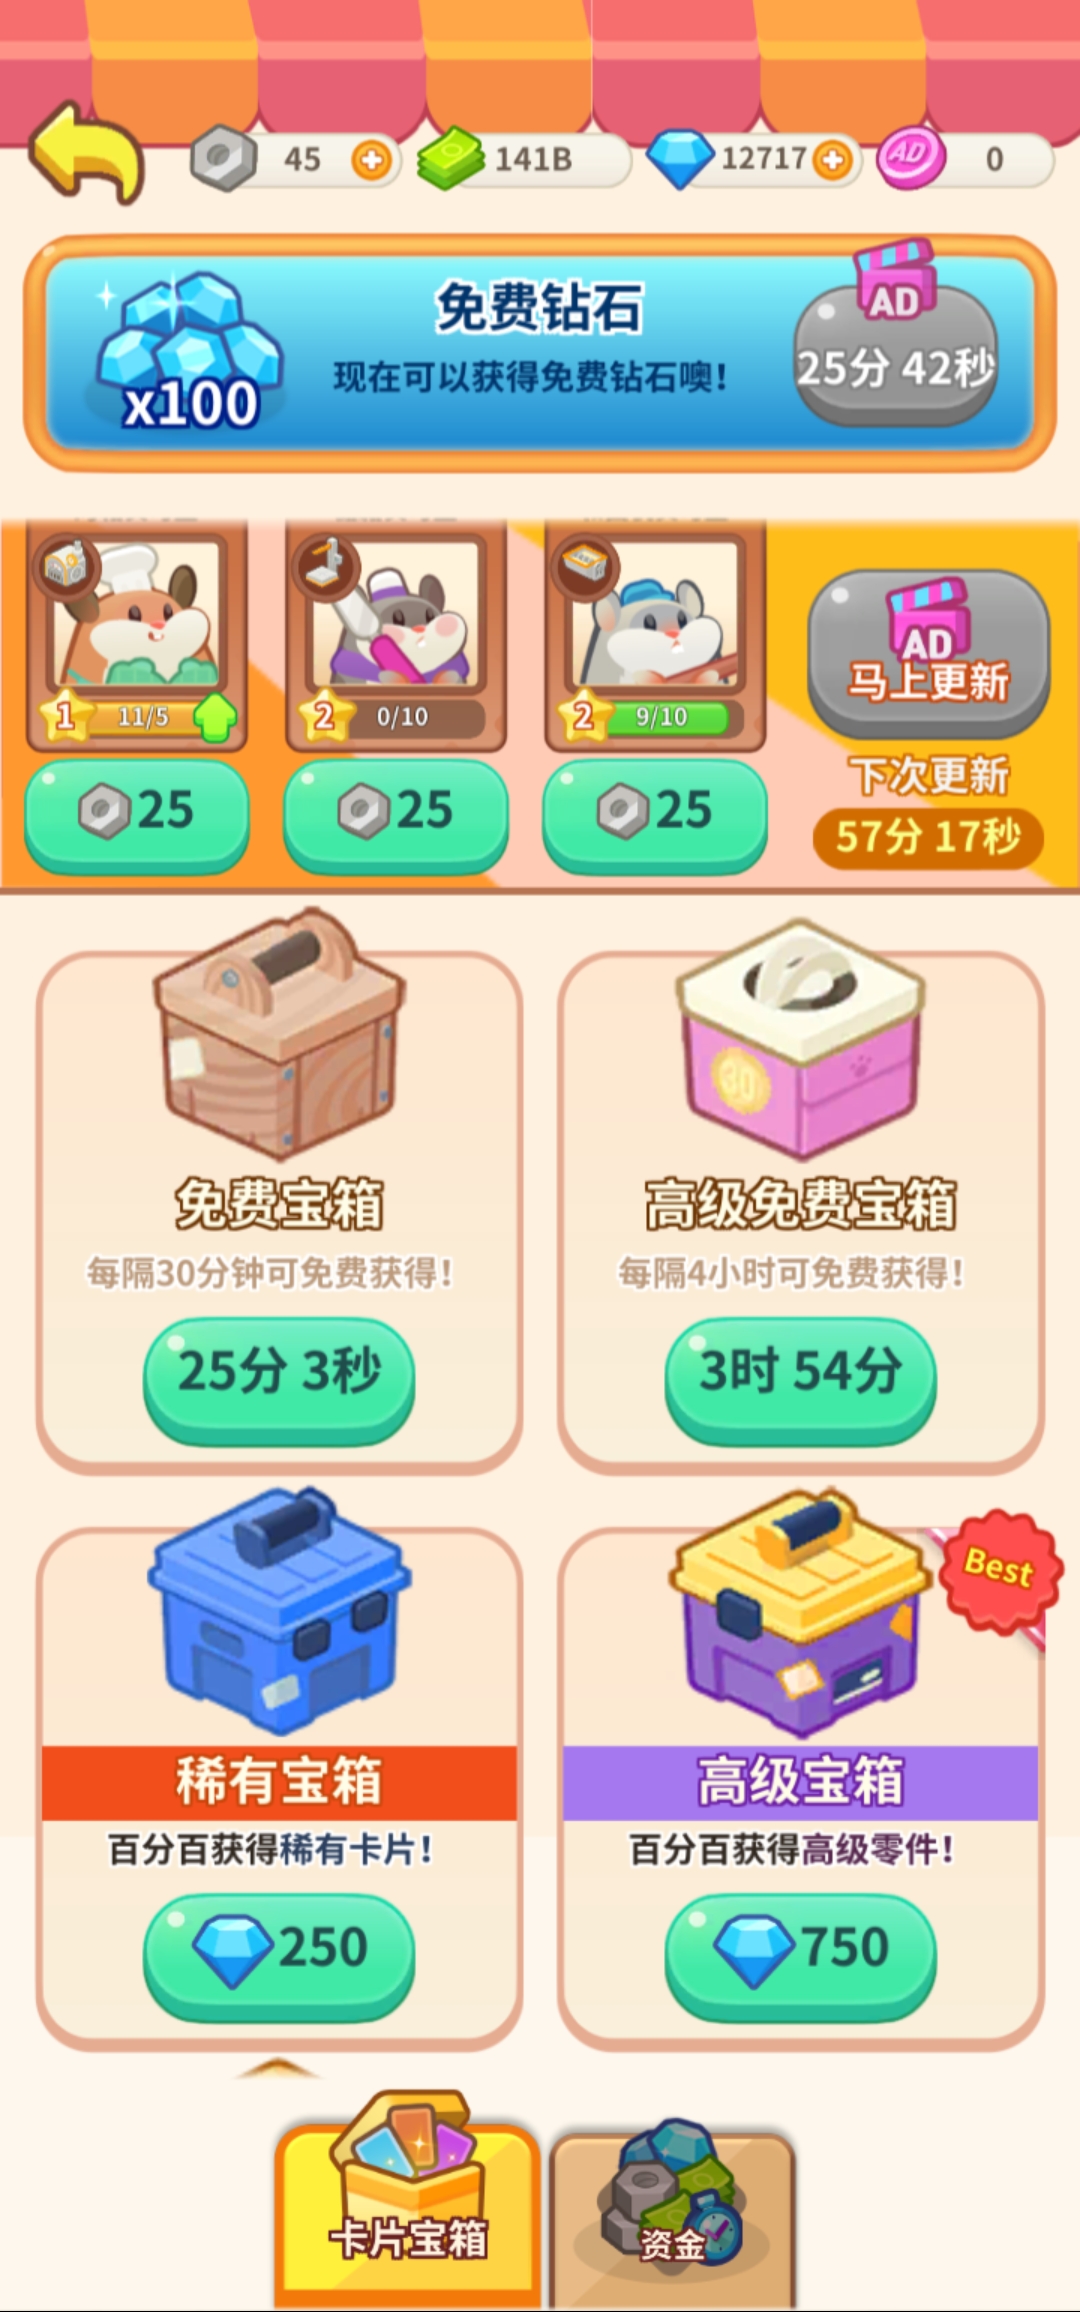 Hamster cake factory cracked version(No Ads)